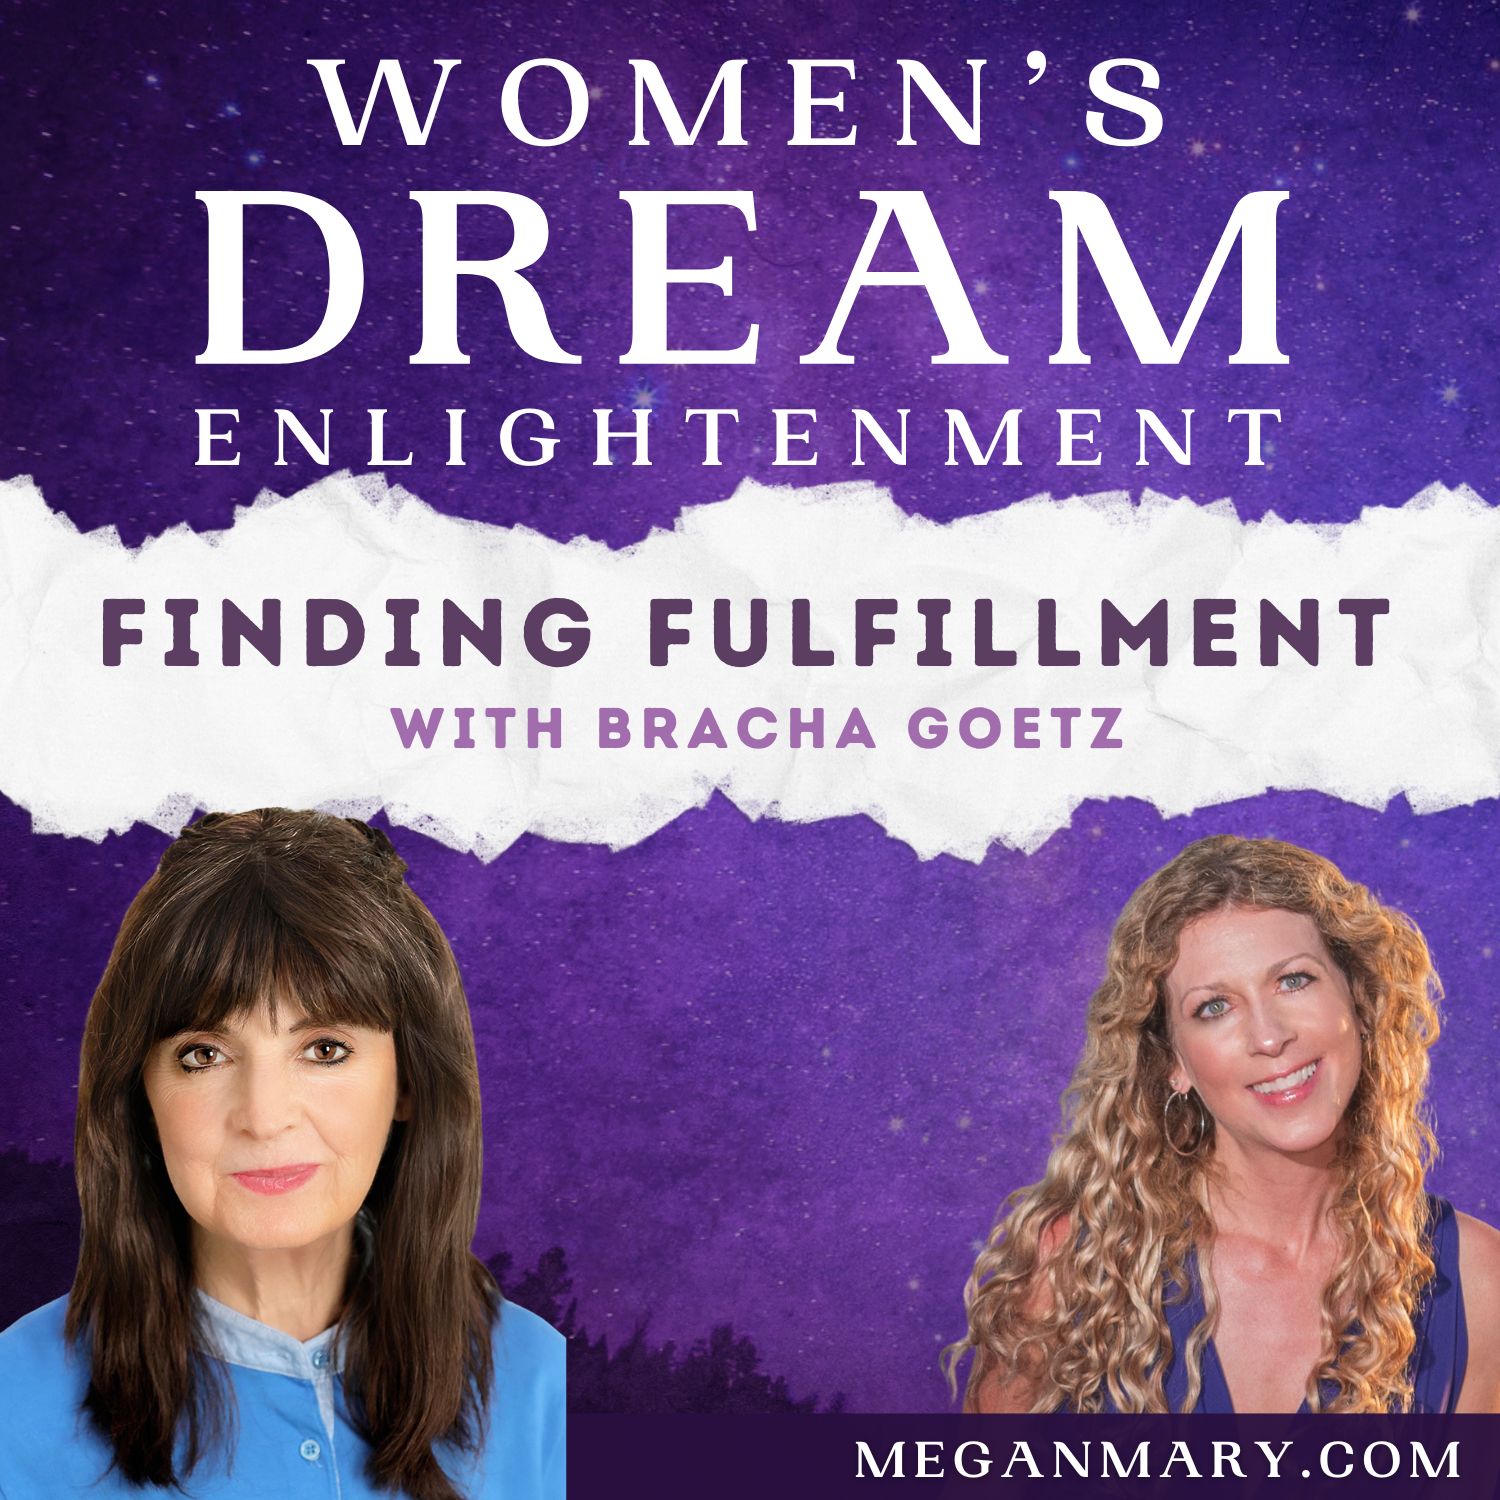 Cosmic Unity, Intuition & Finding Fulfillment with Bracha Goetz